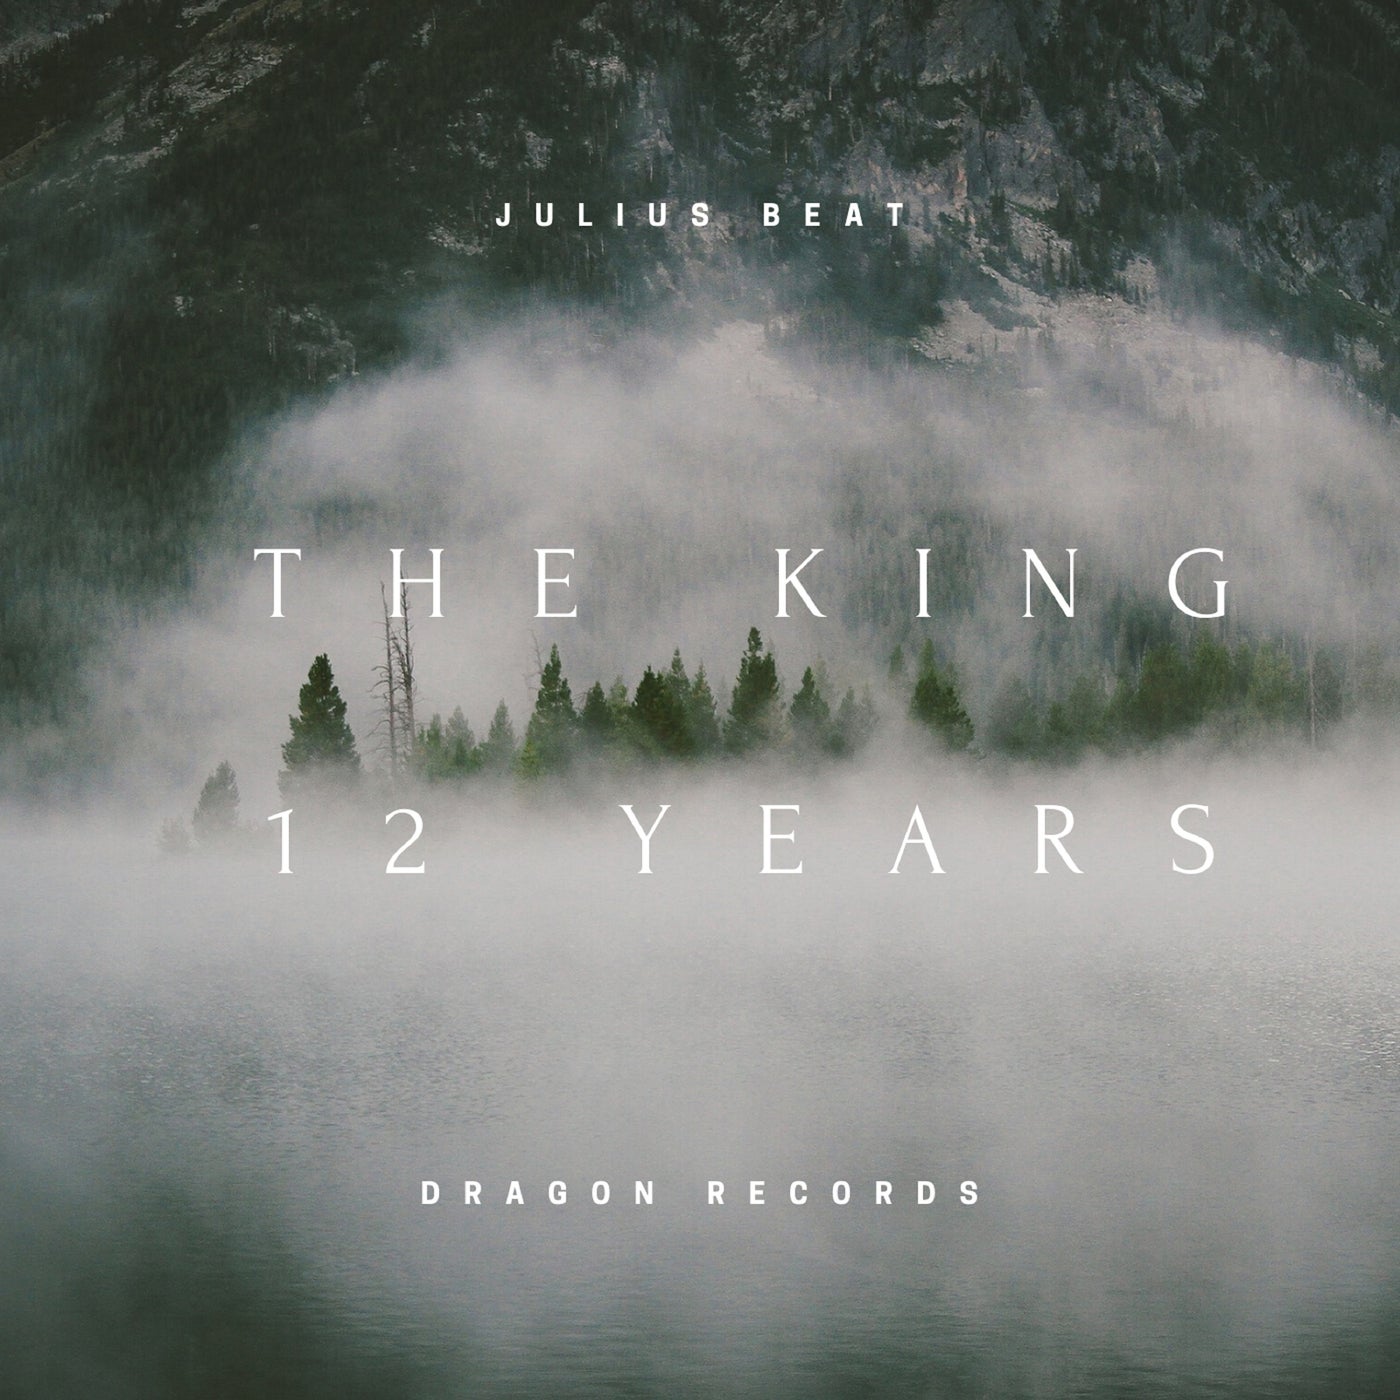 The King 12 Years